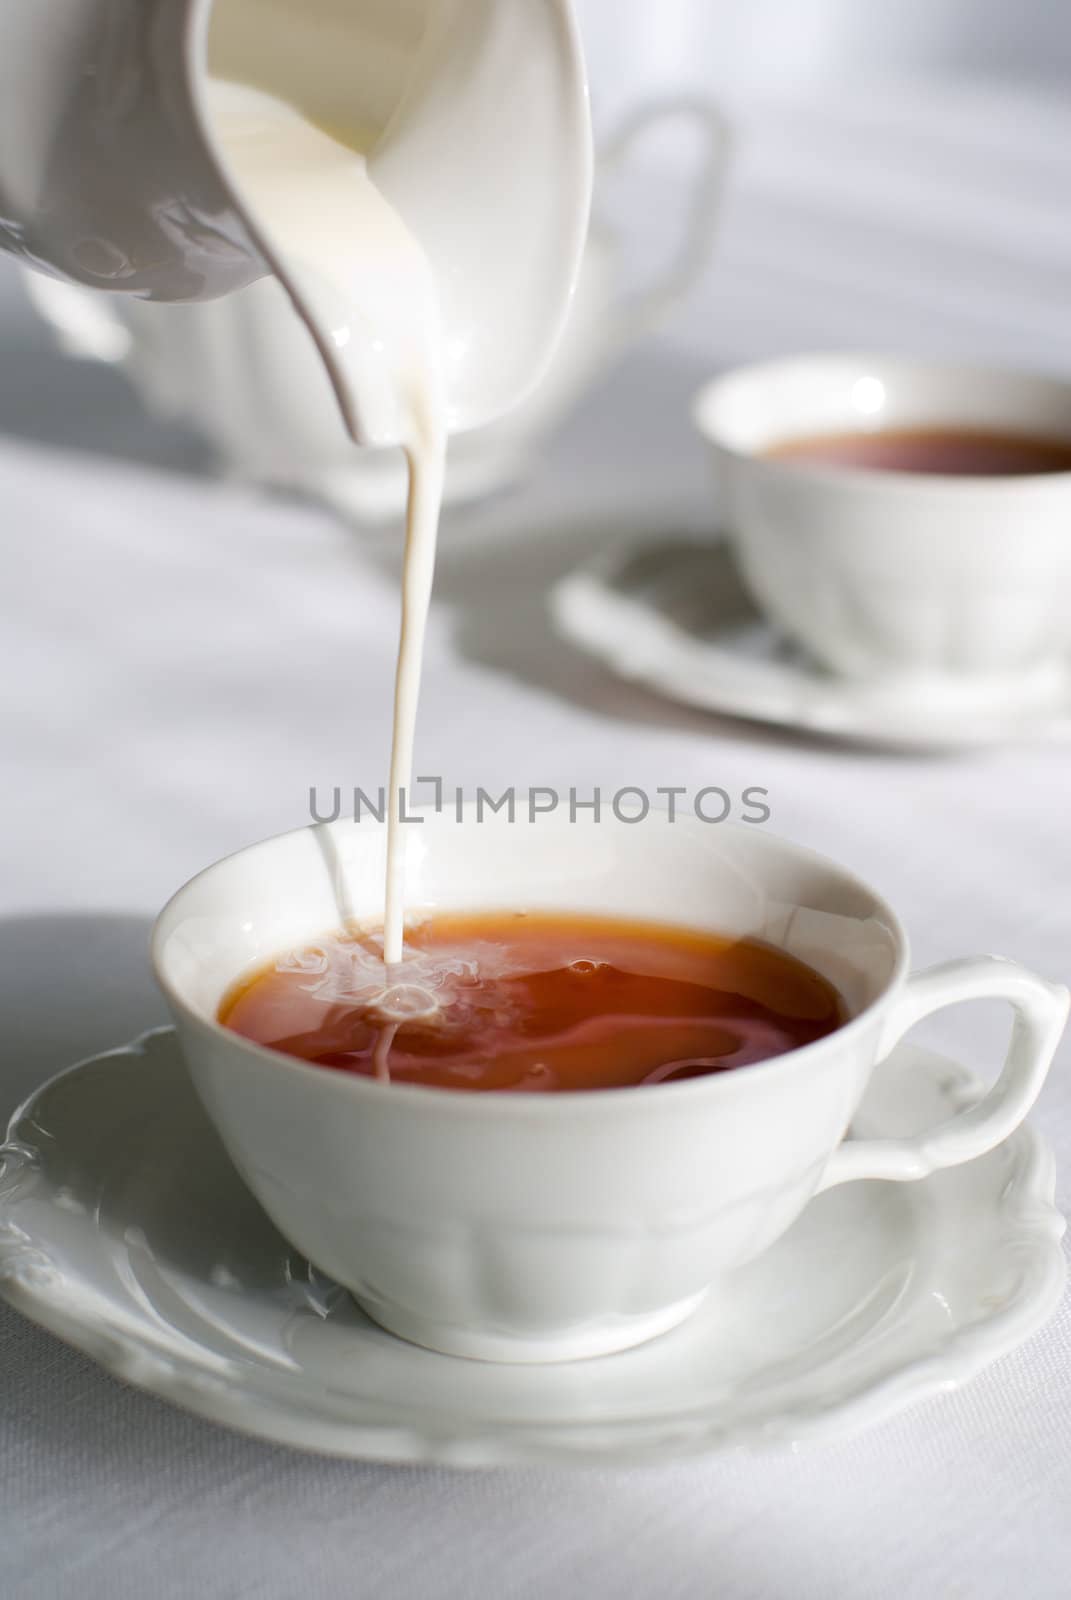 Pouring milk from porcelain milk jug into cup filled with tea - white tablecloth background.